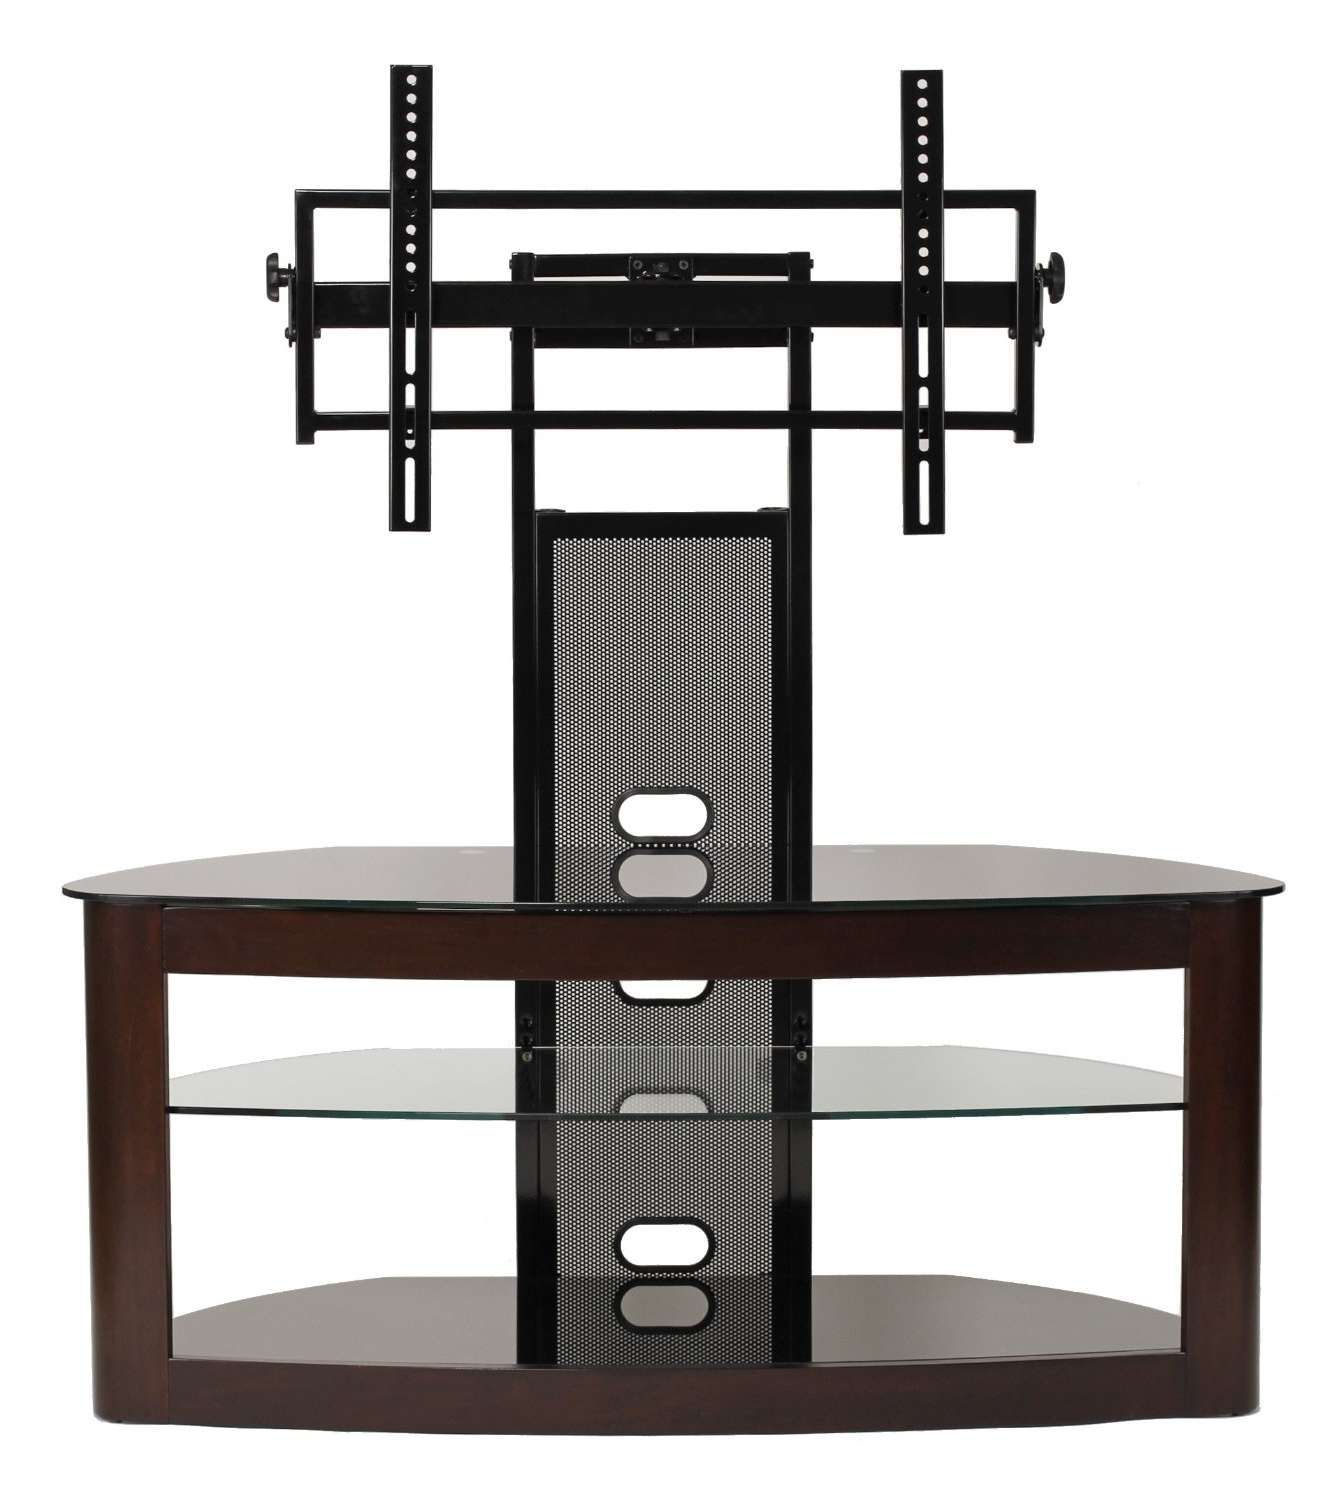 Furnitures : 391447a6146c 1 Inch Tv Stand With Mount Furnitures Pertaining To 65 Inch Tv Stands With Integrated Mount (Gallery 4 of 15)